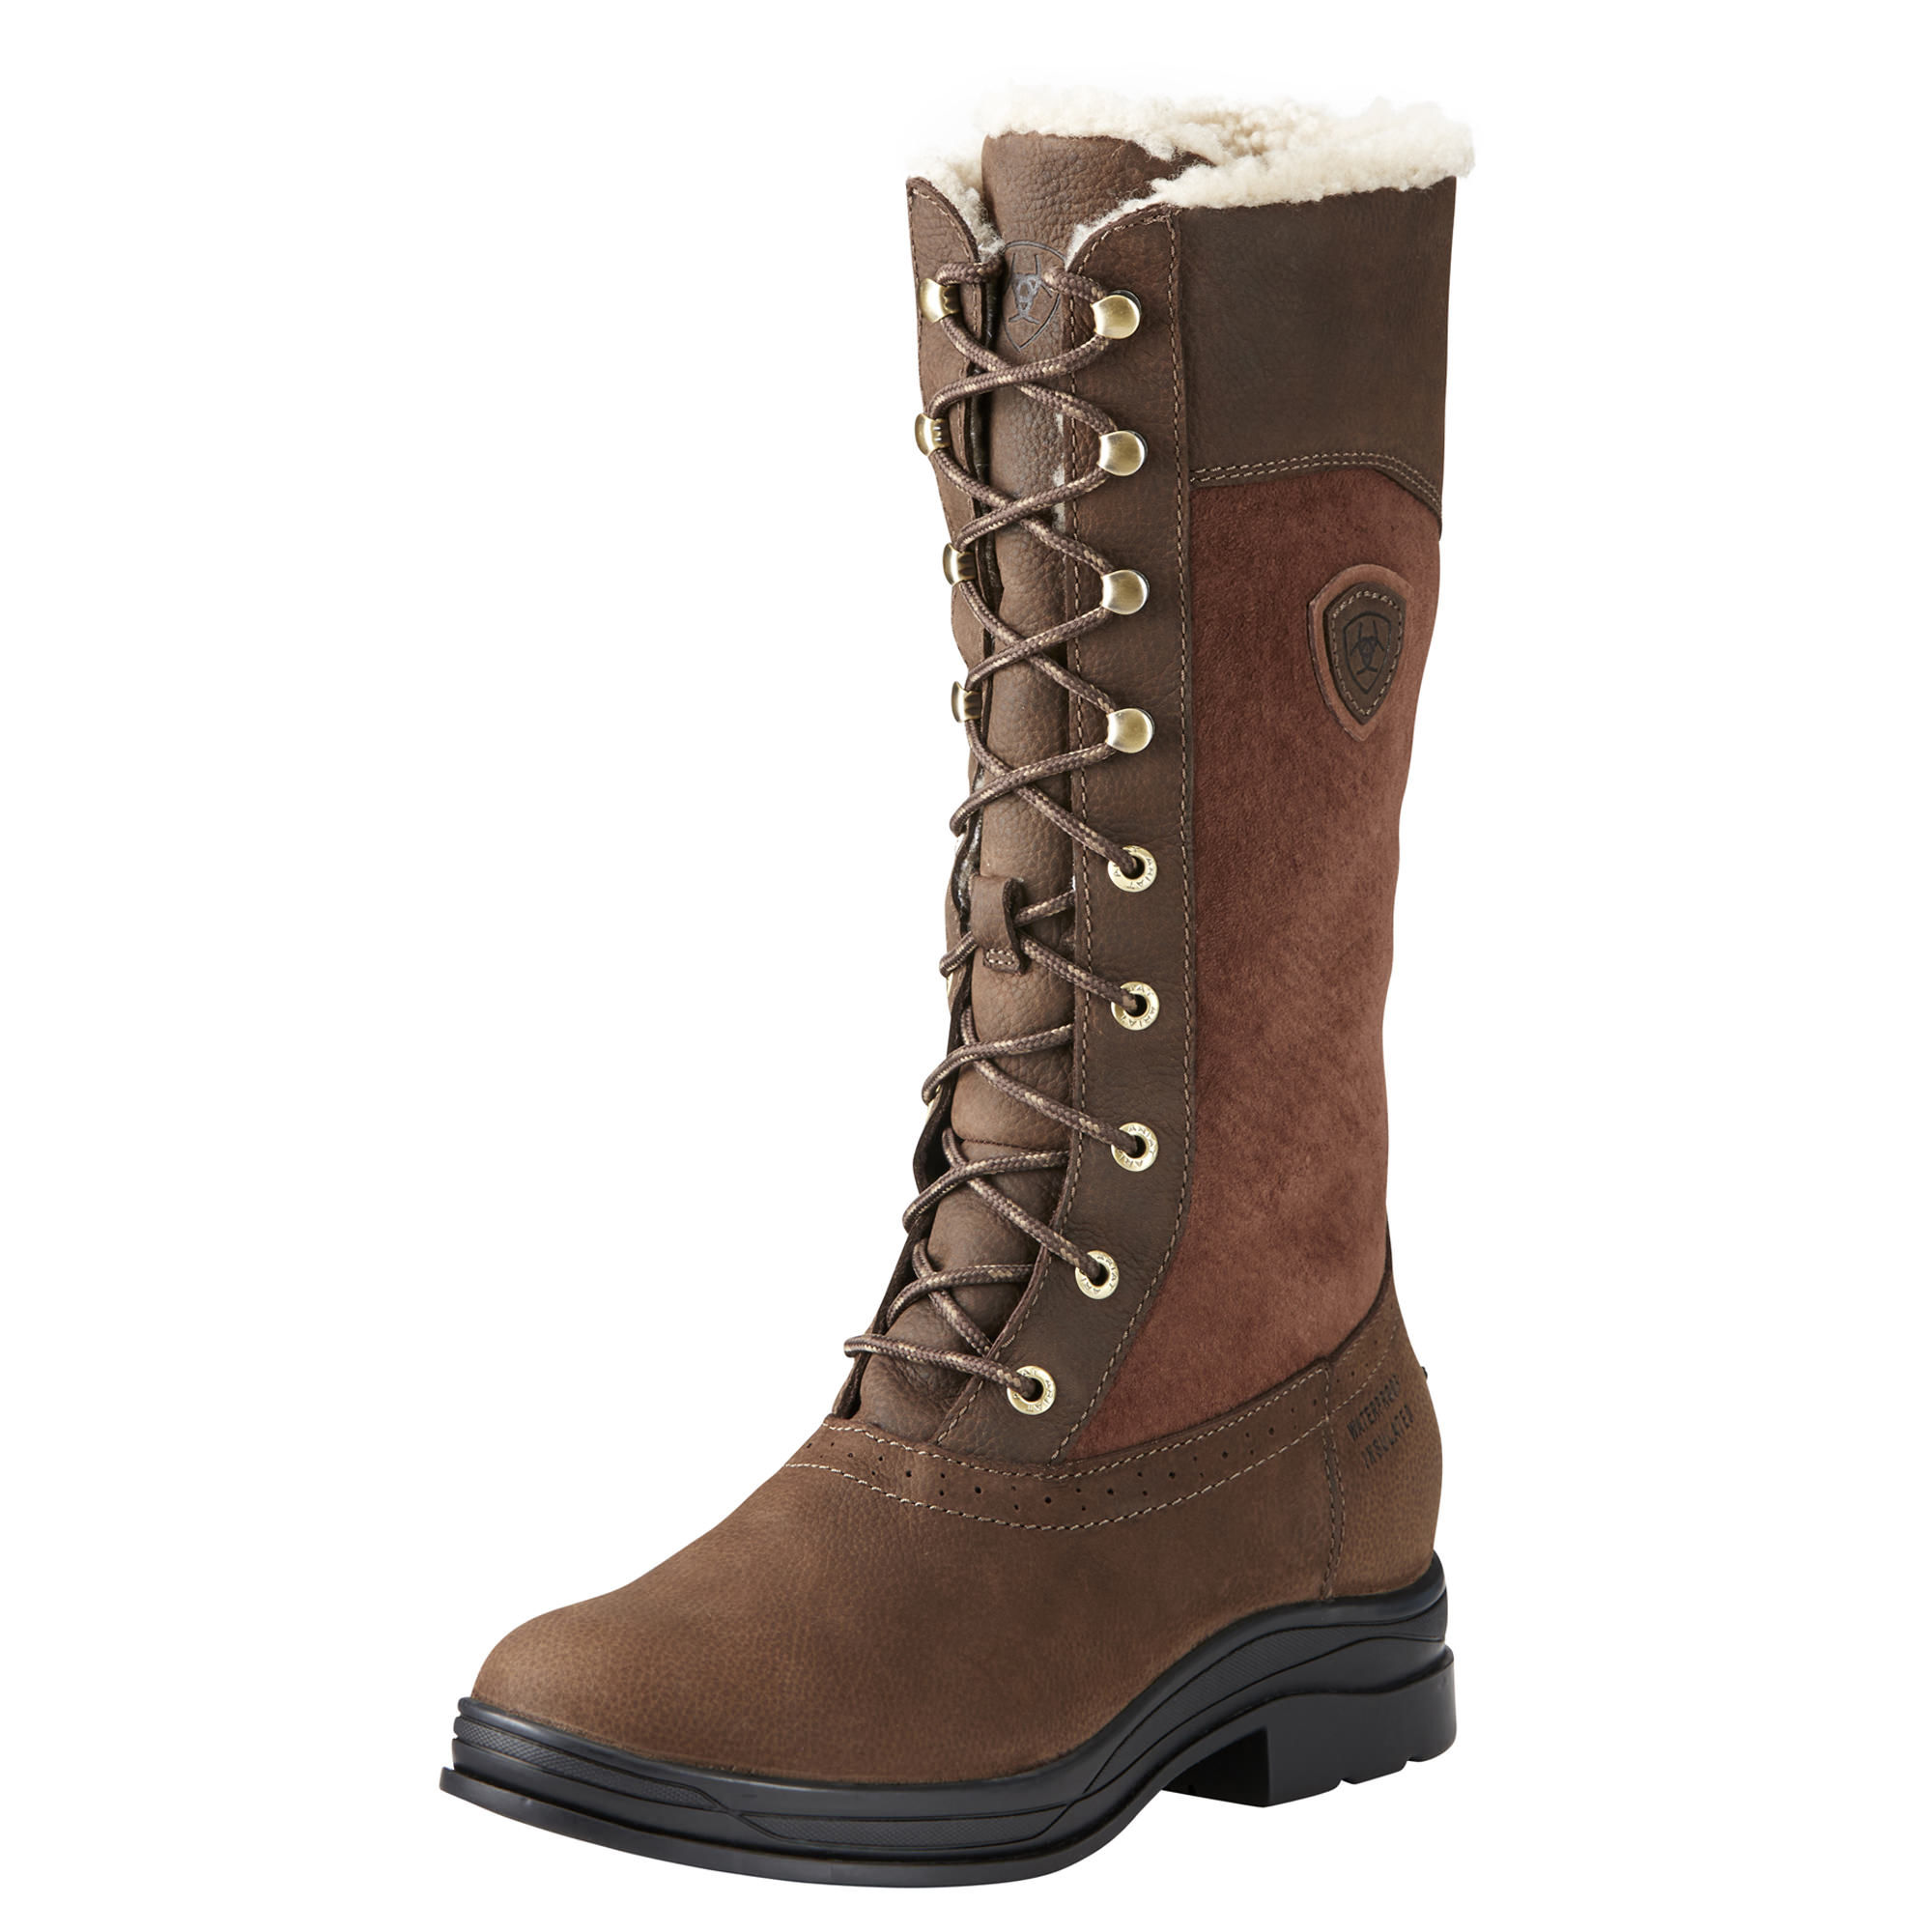 Ariat Wythburn H20 Insulated Java Boot